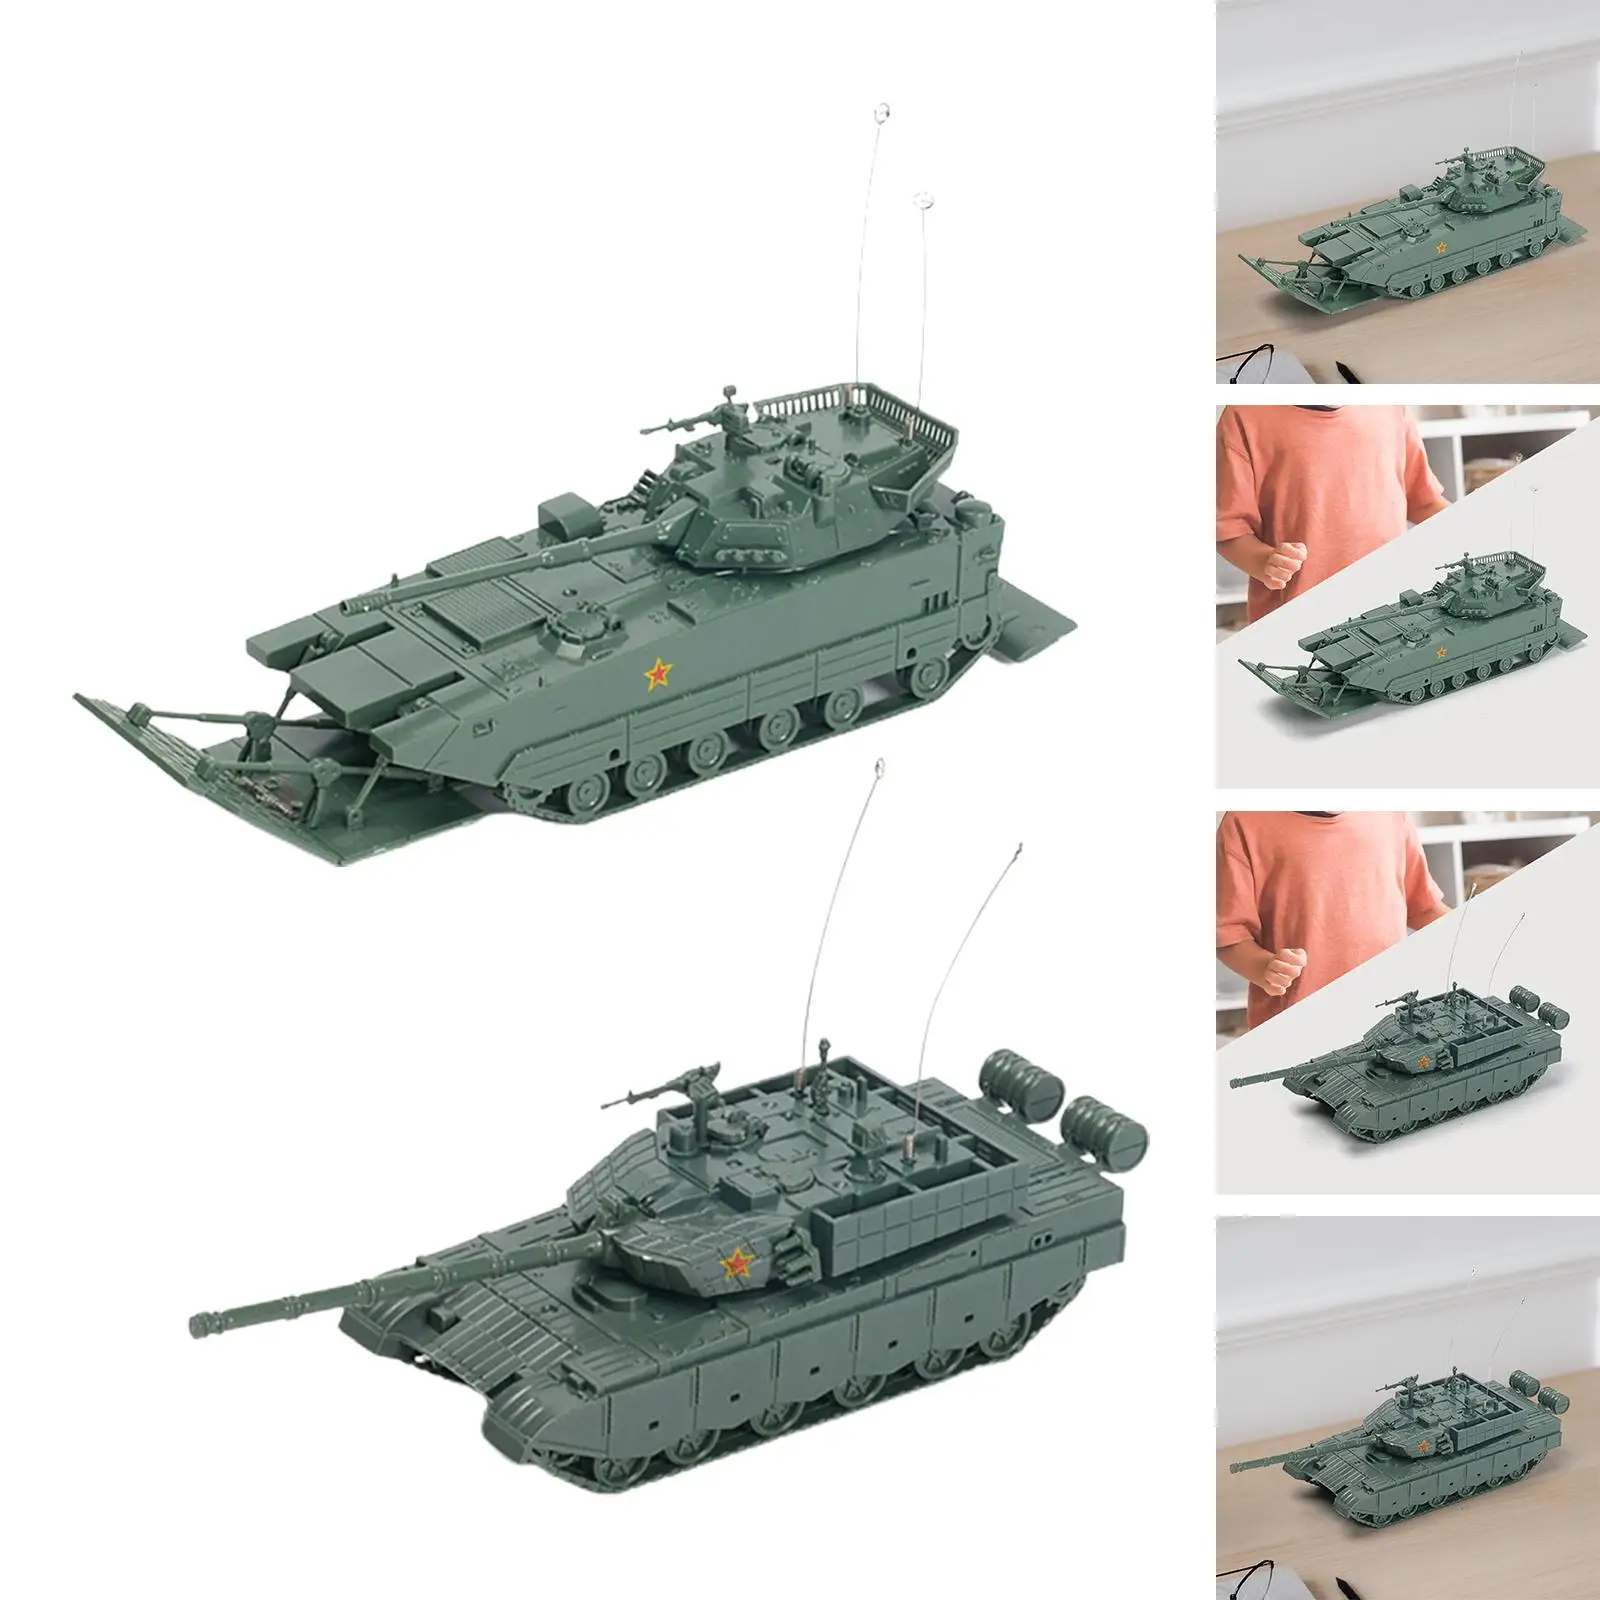 1/72 Puzzles Education Toy 4D Tank Model Assembled Tank Model for Tabletop Decor Collectibles Gift Party Favors Display kids